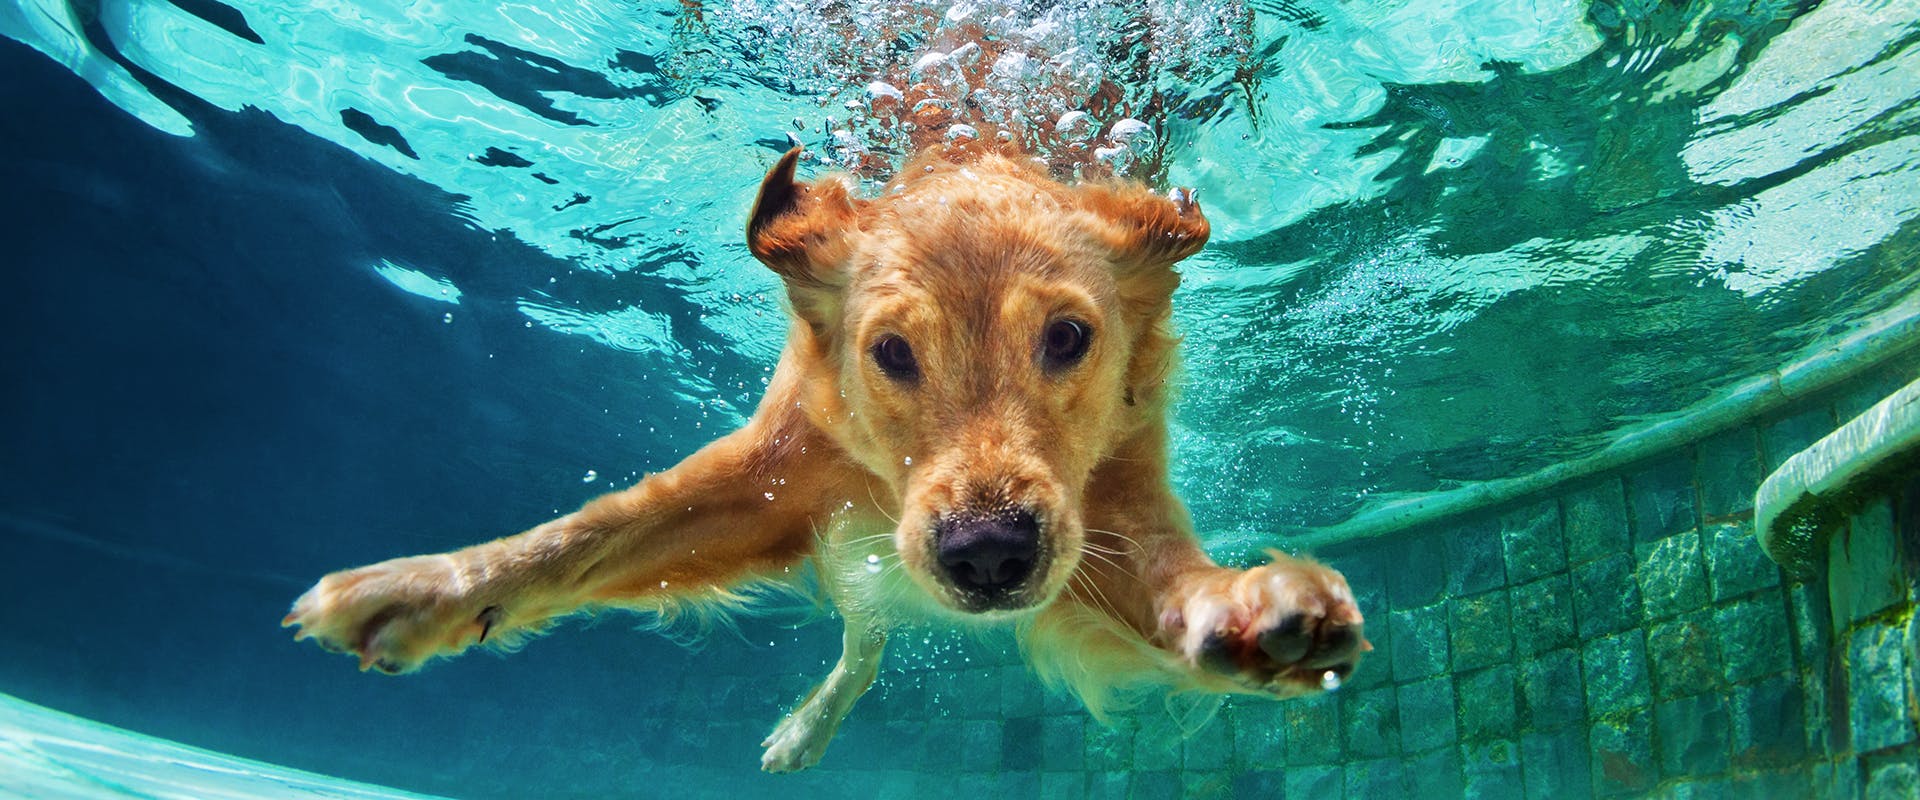 Dog in a summer setting swimming underwater